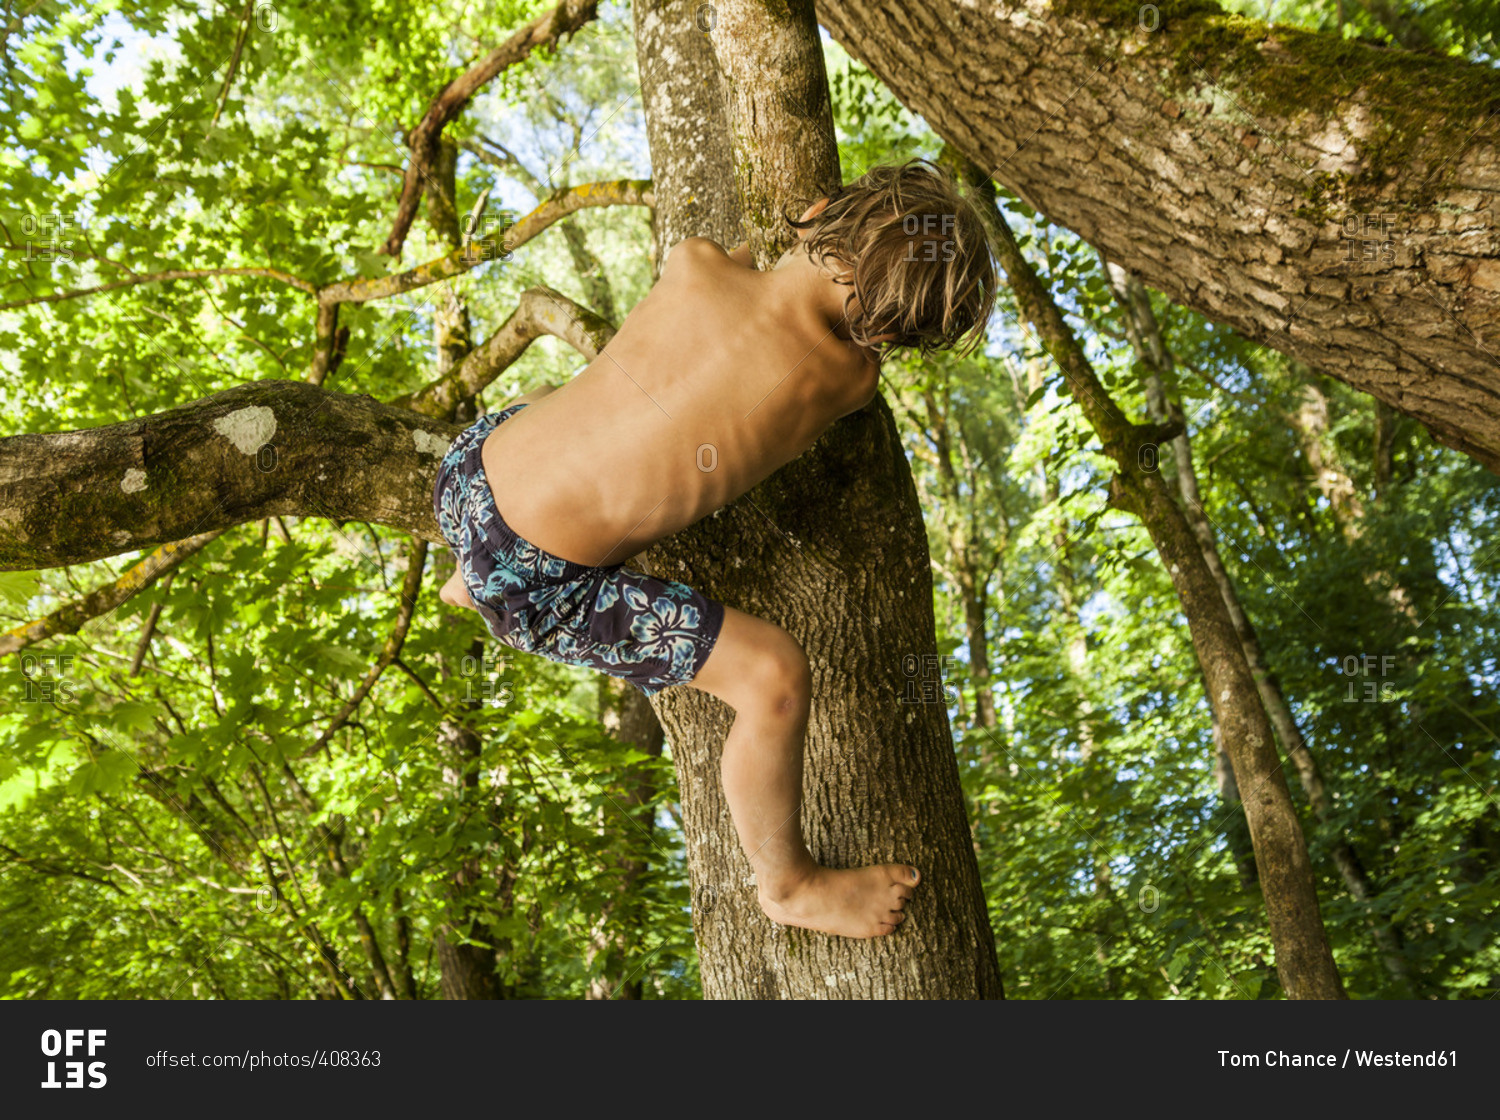 Back View Of Babe Babe Climbing On A Tree In The Forest Stock Photo OFFSET